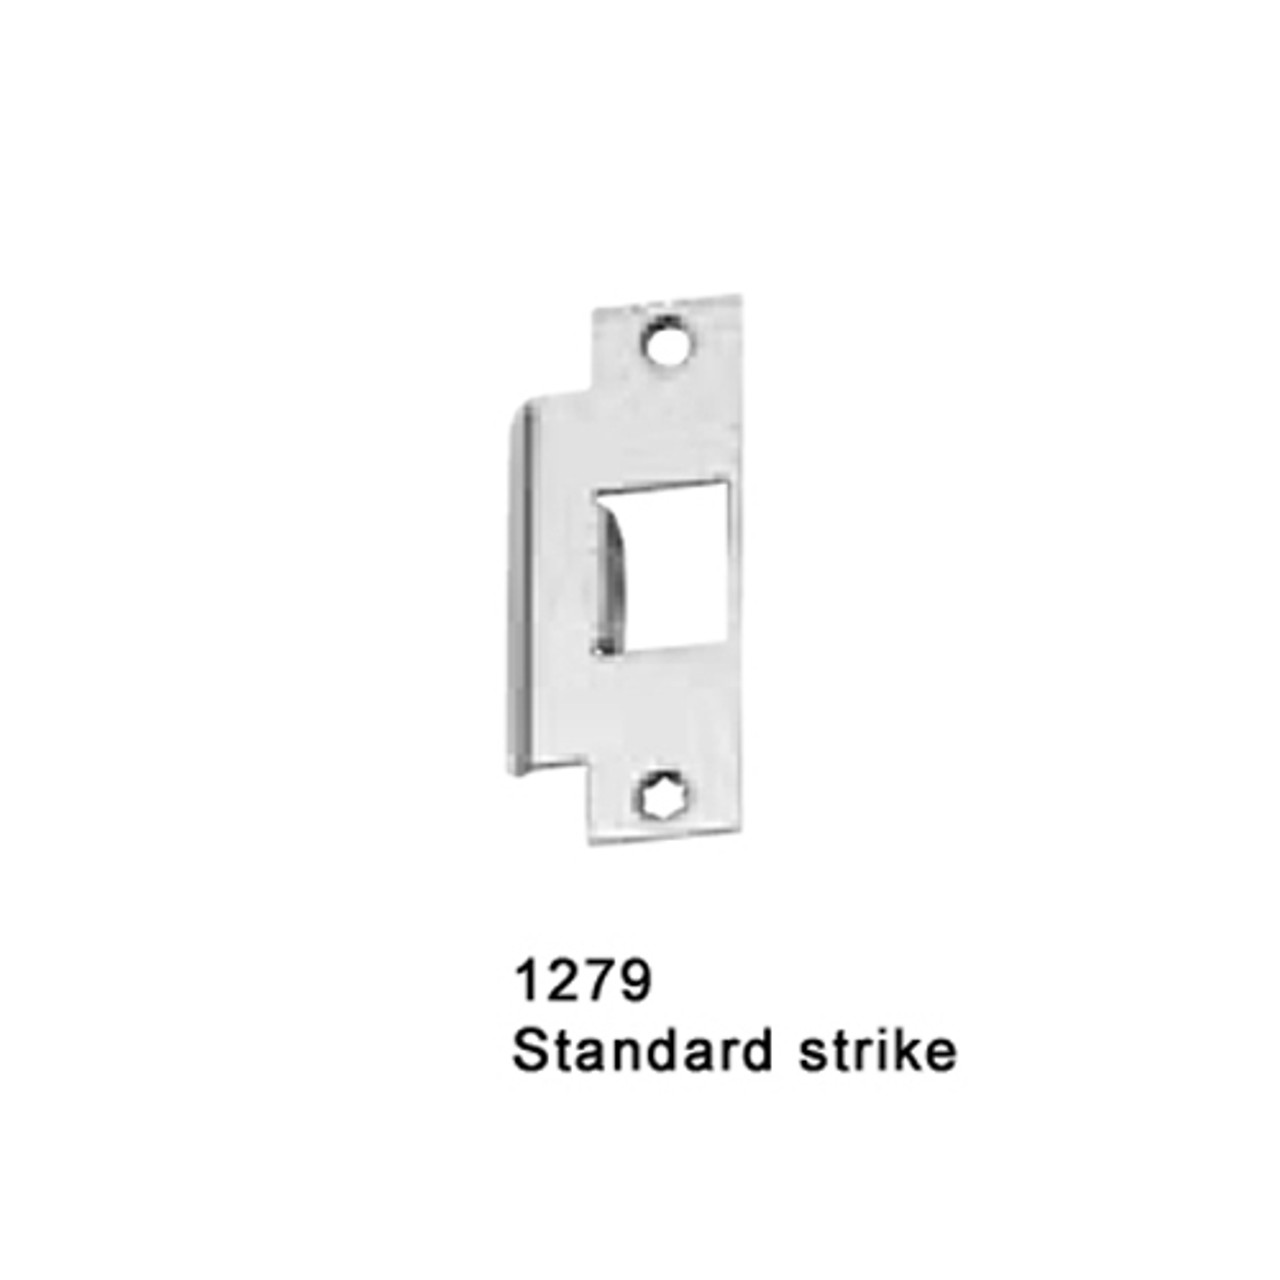 CD25-M-L-DANE-US4-4-LHR Falcon 25 Series Mortise Lock Devices with 510L Dane Lever Trim in Satin Brass